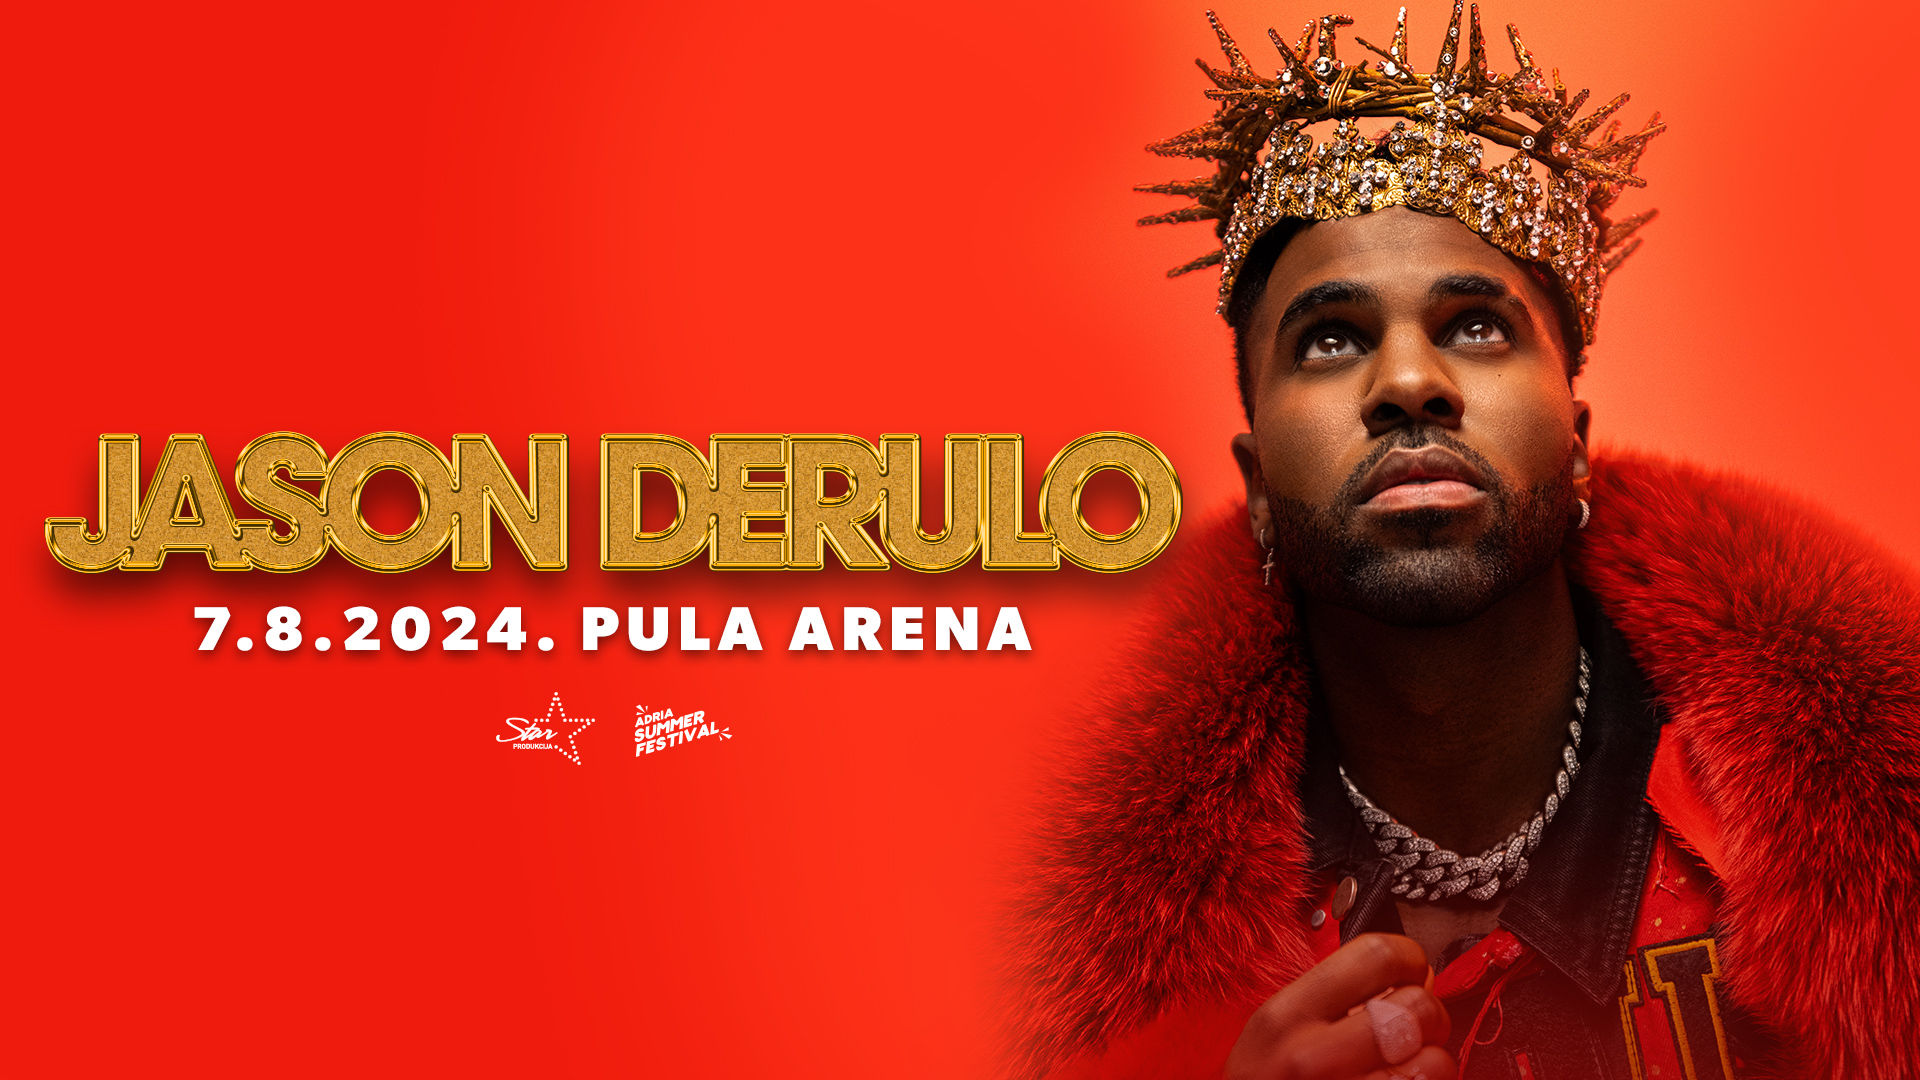 American singer-songwriter Jason Derulo will perform this summer at the Pula Arena in Croatia. 